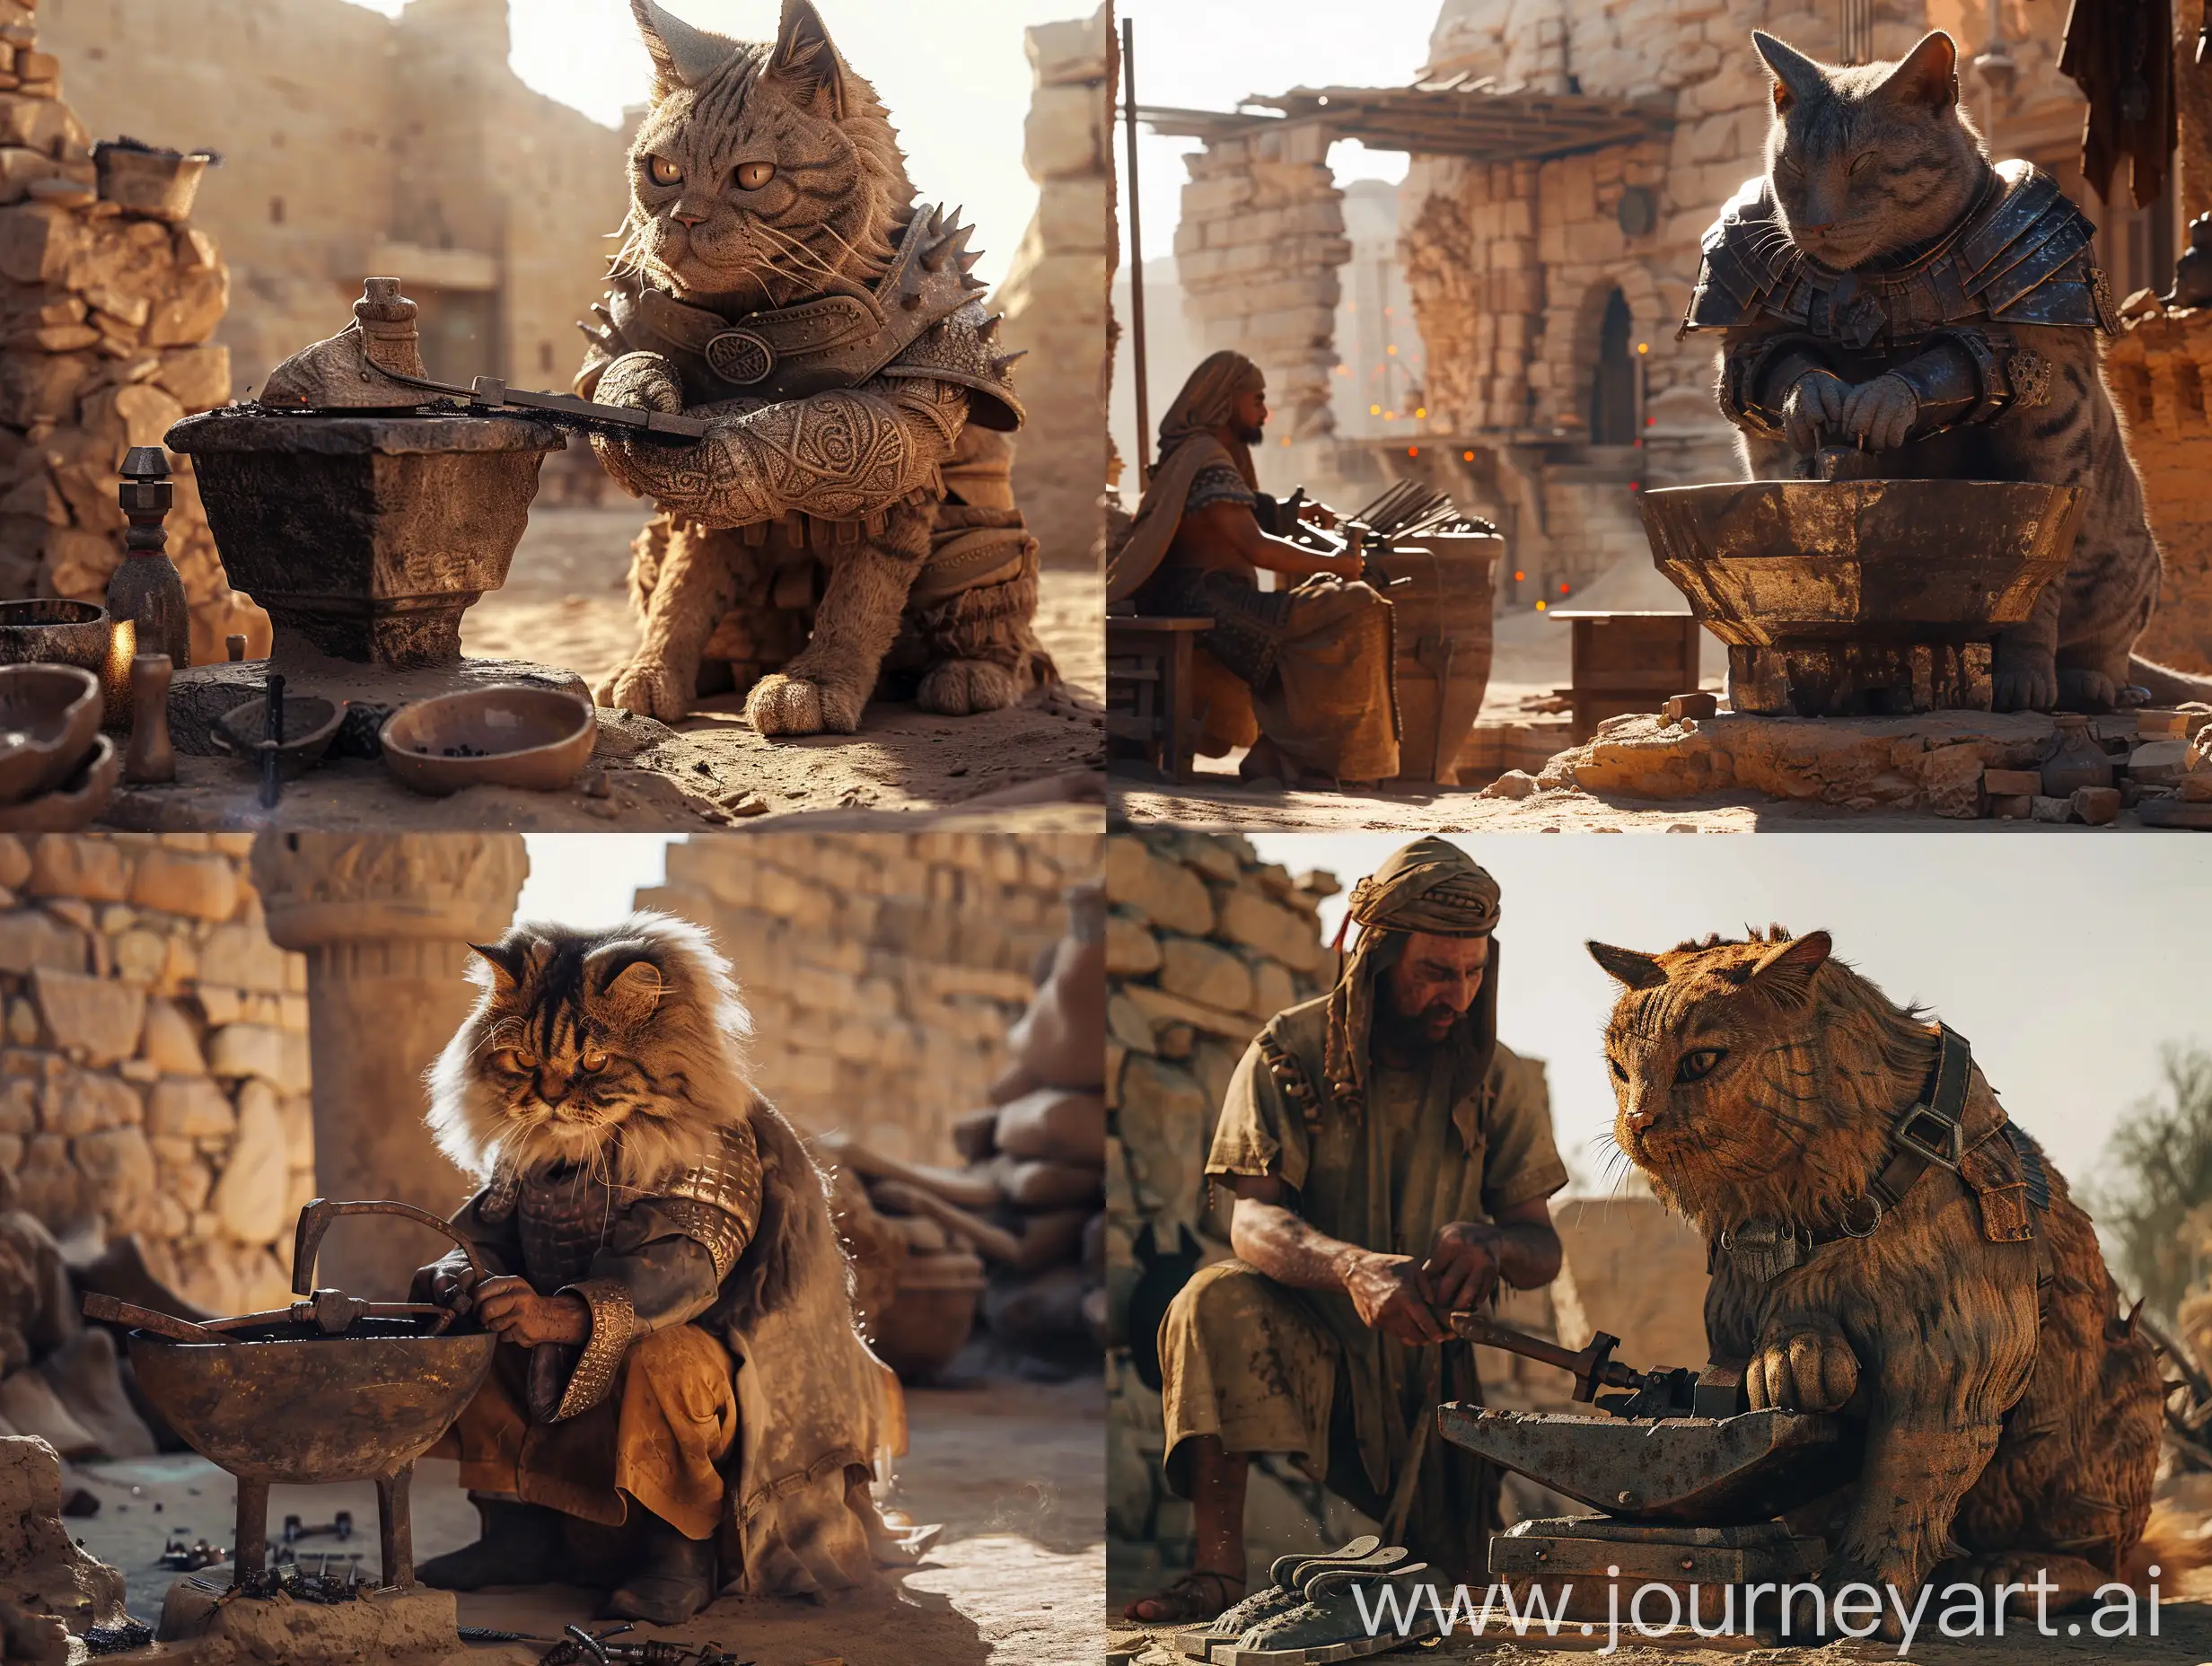 Master-Blacksmith-Crafting-Iron-Shoes-and-Armor-for-Majestic-Persian-Cat-in-Ancient-Desert-Civilization